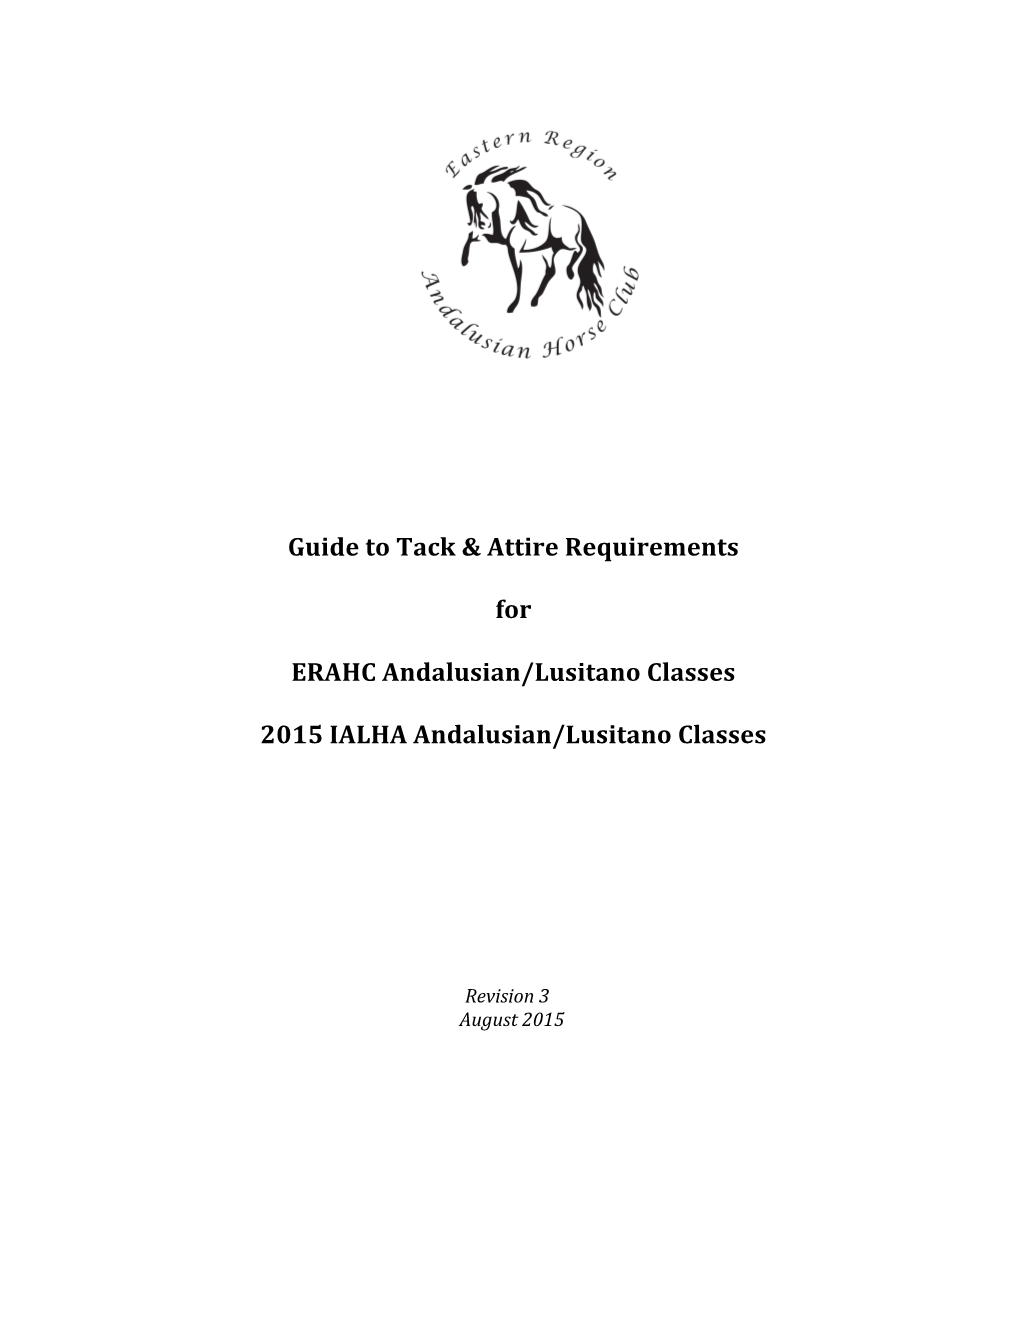 Guide to Tack & Attire Requirements for ERAHC Andalusian/Lusitano